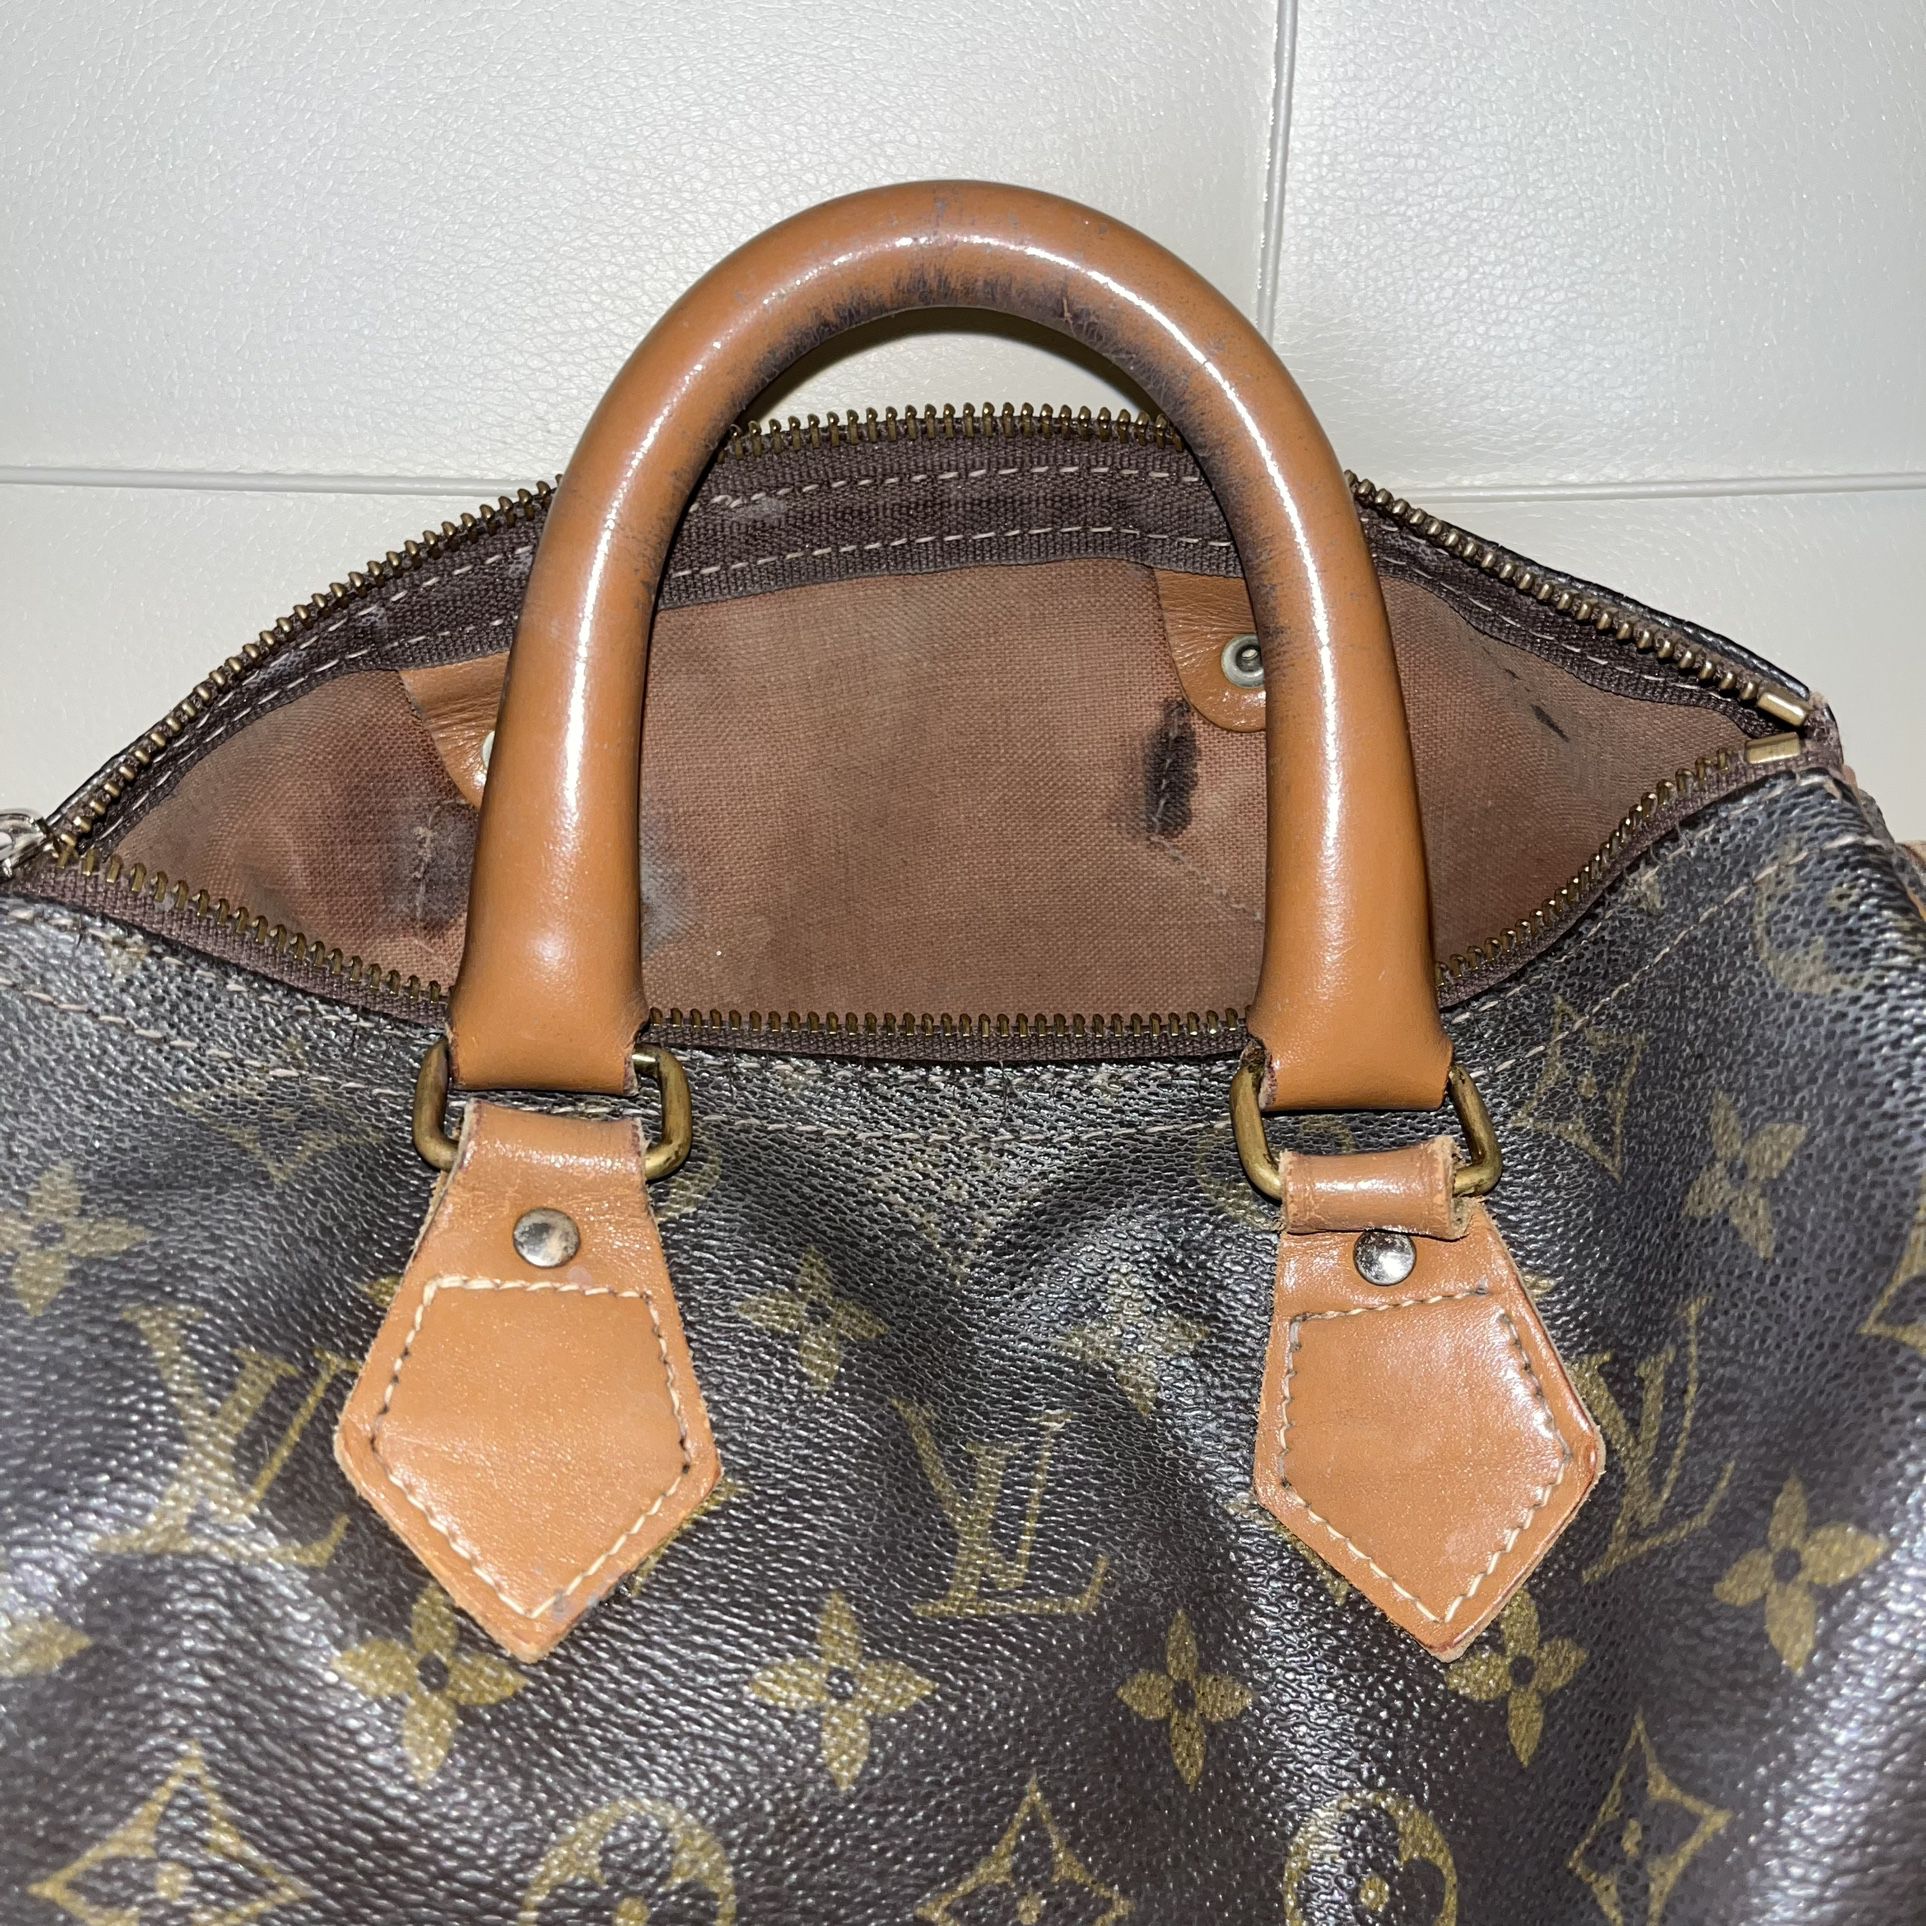 I Have Those Louis Vuitton For Sale I Don't Have Time To Sell Separately  for Sale in West Hollywood, CA - OfferUp